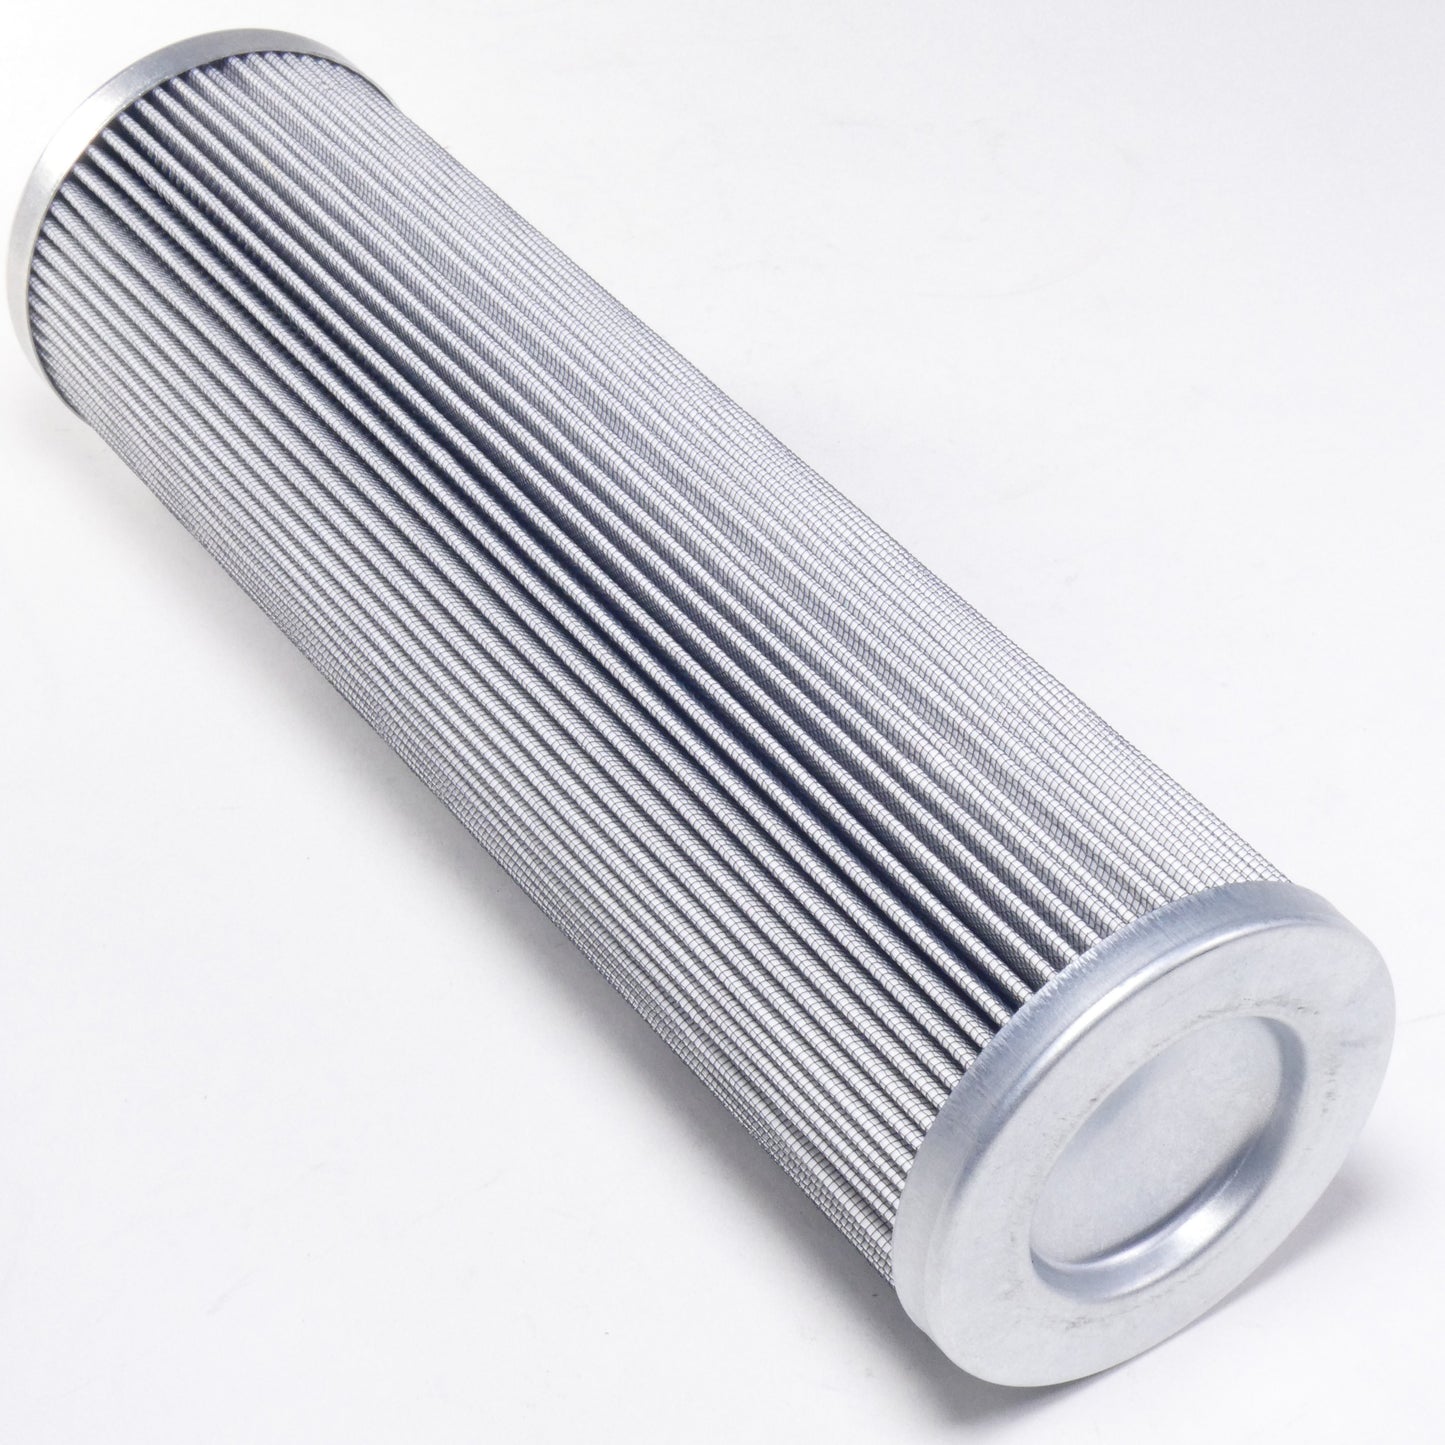 Hydrafil Replacement Filter Element for Hycoa V134-0250-B-1